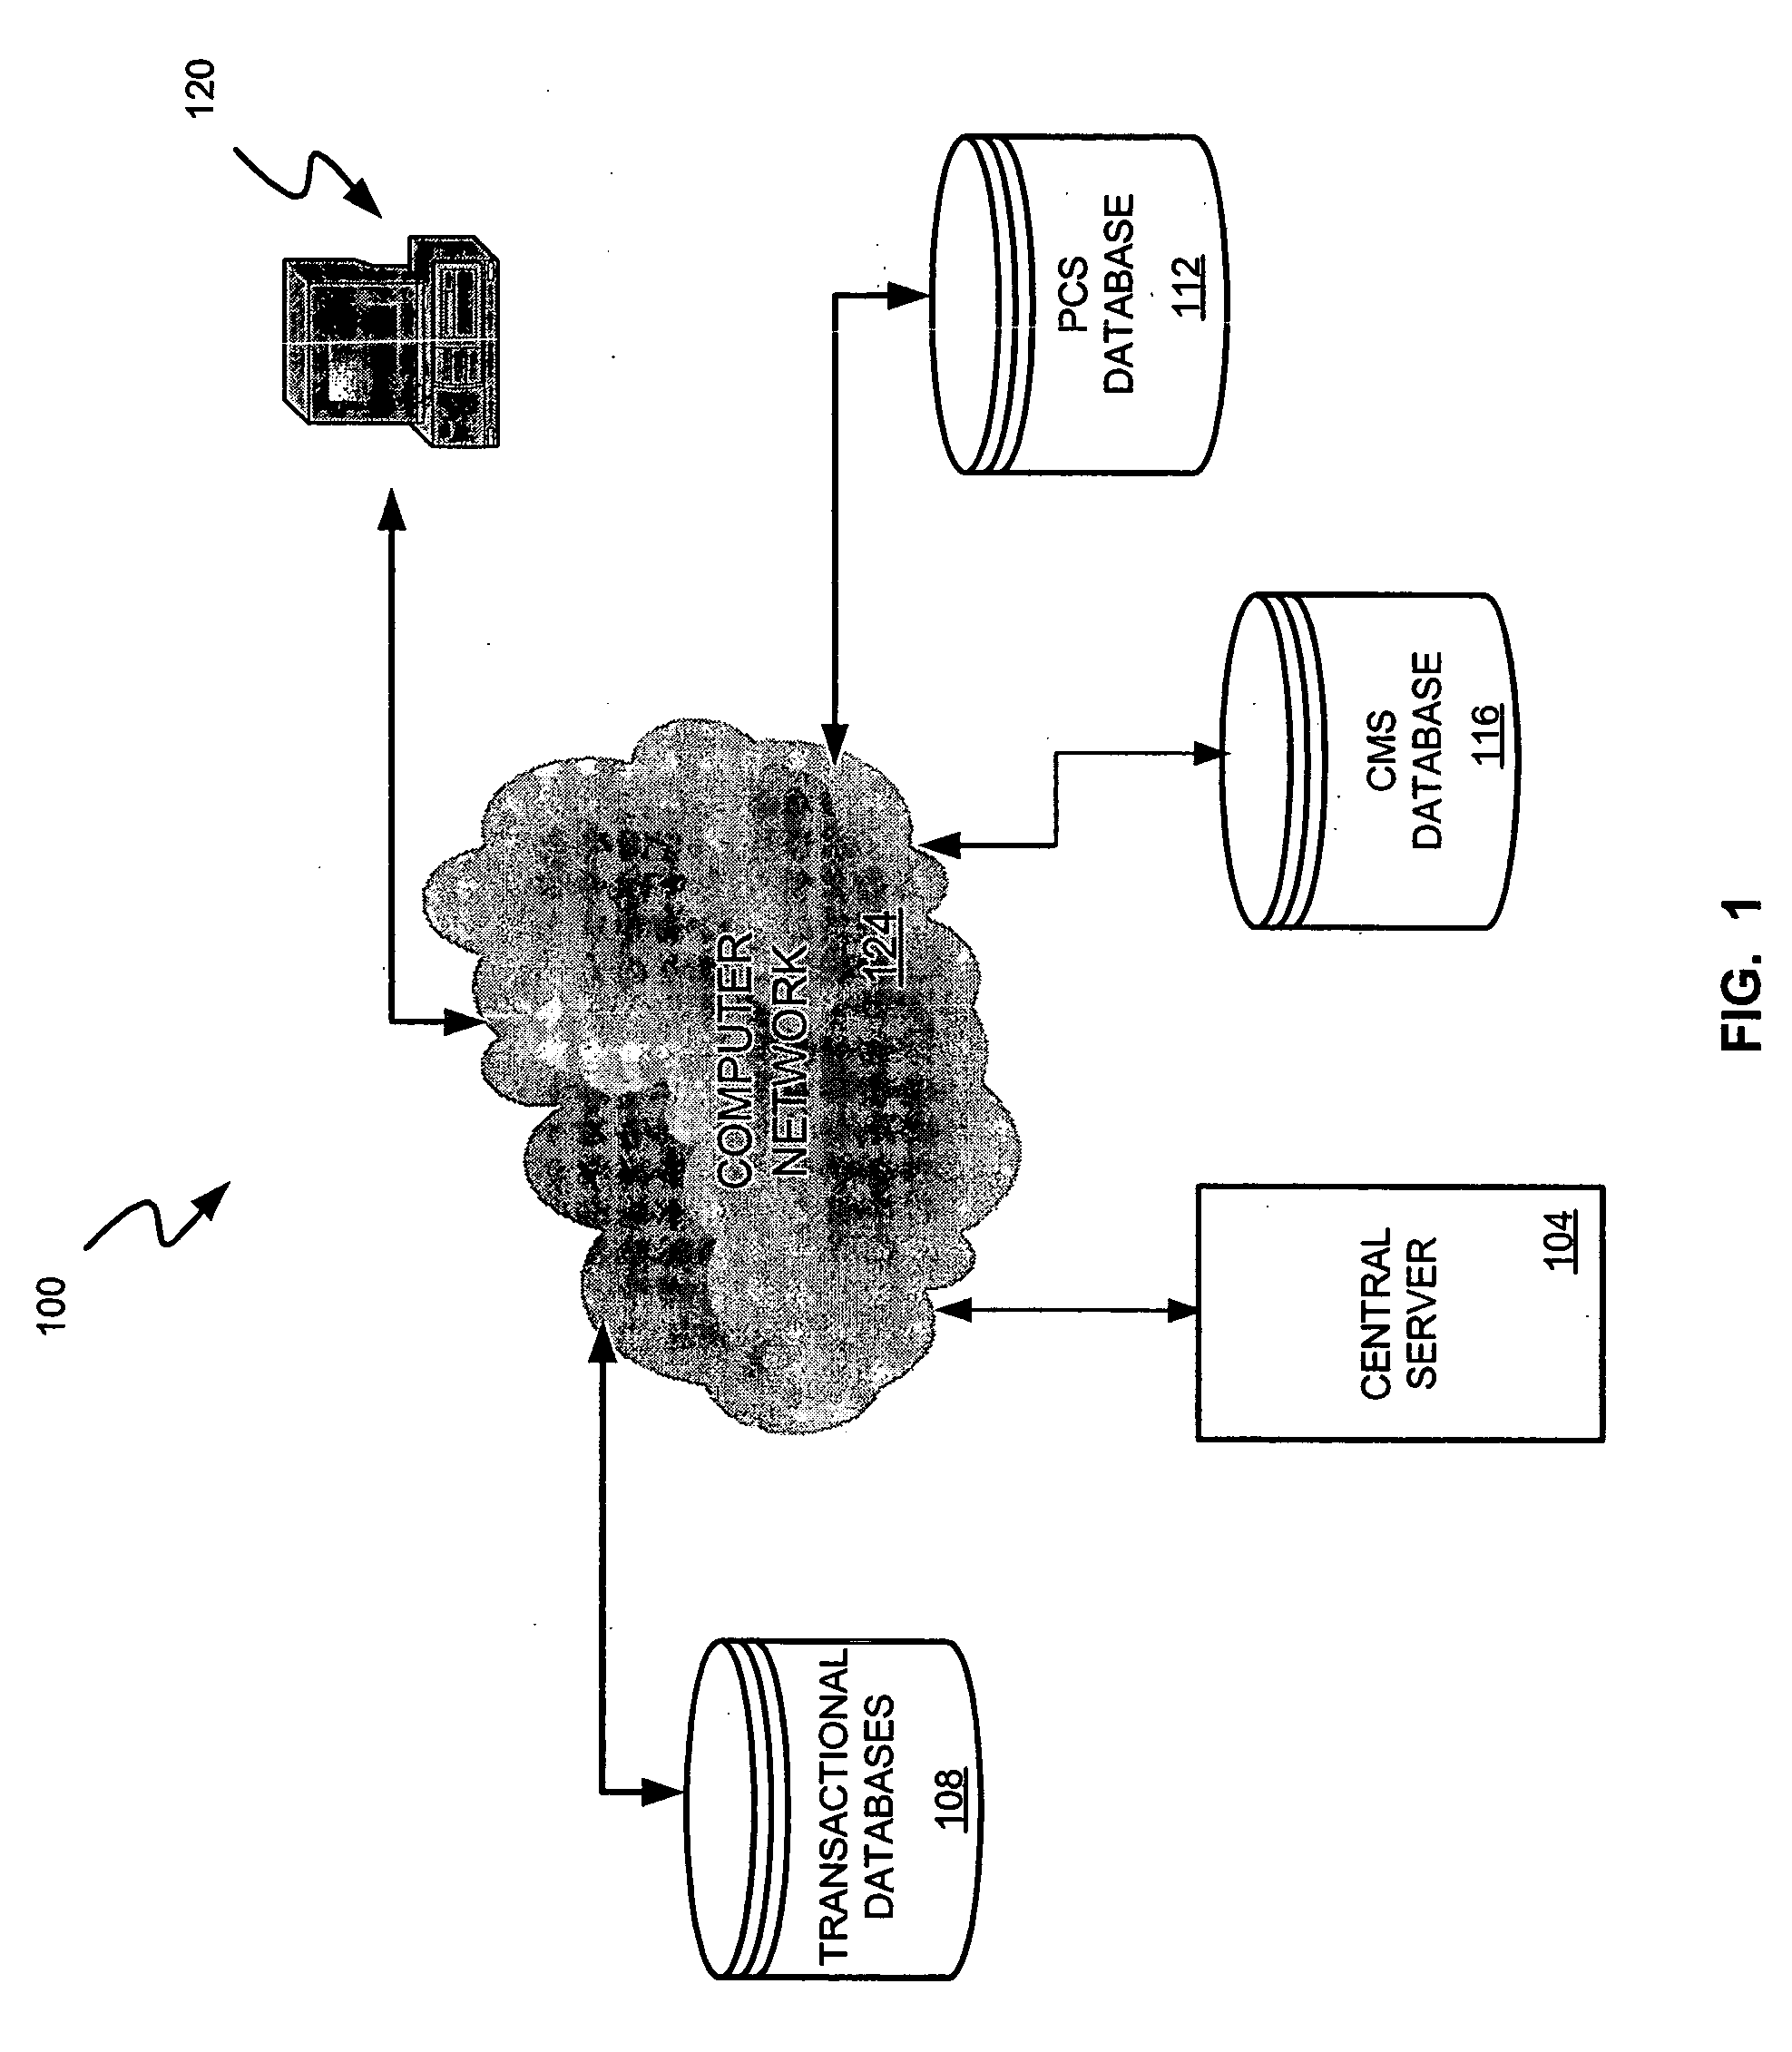 System and method for distributed data warehousing